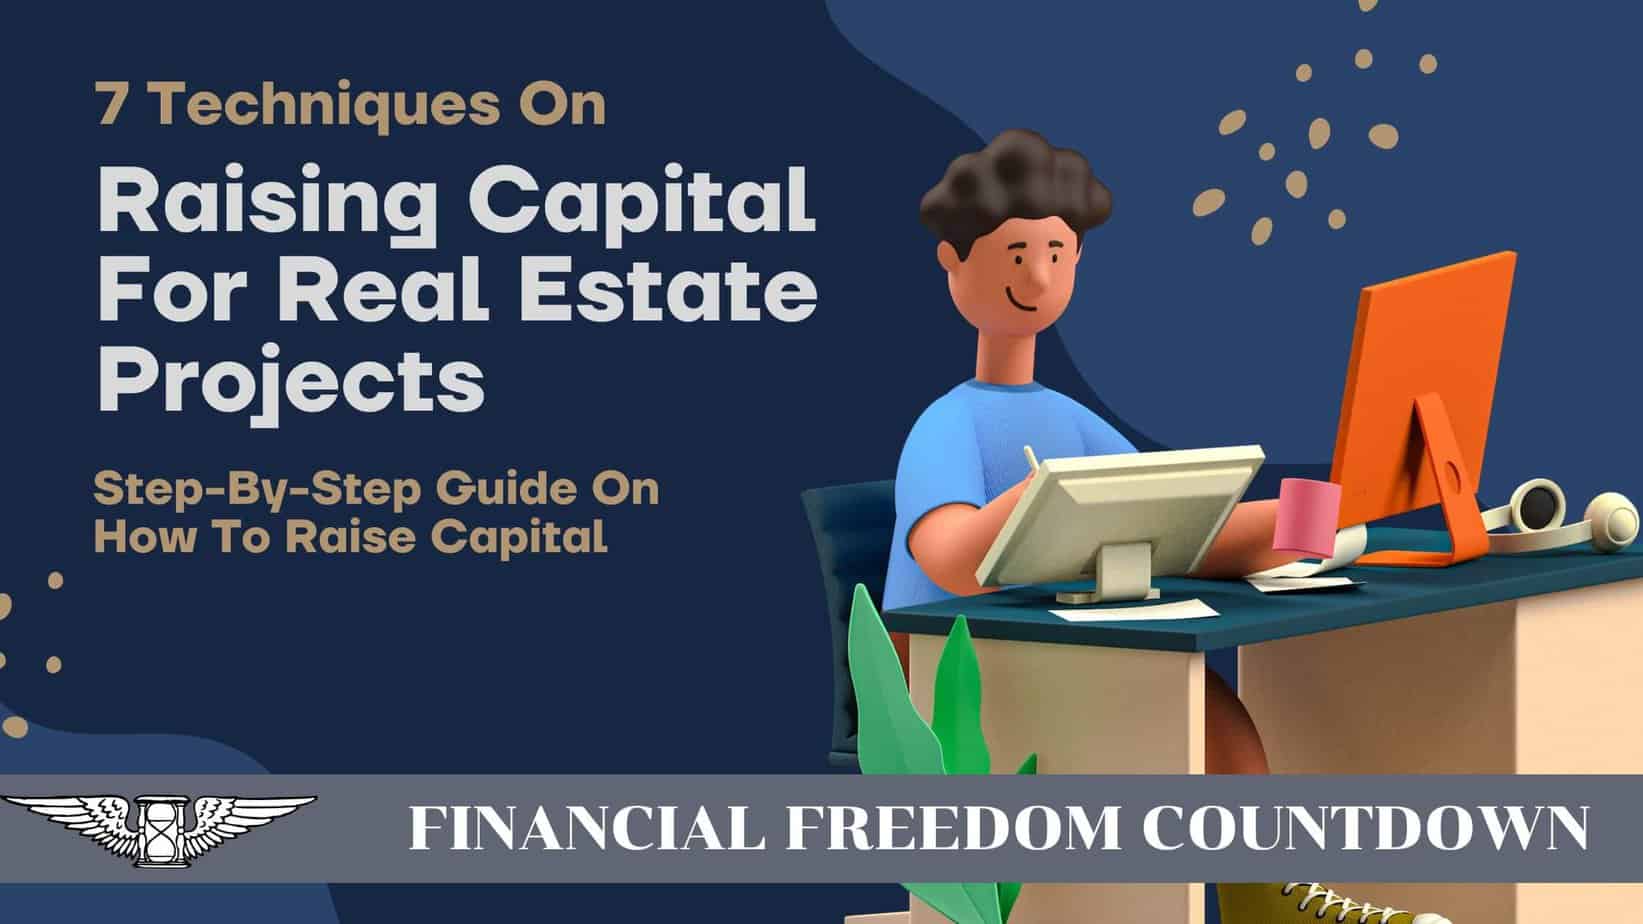 Step-By-Step Guide On How To Raise Capital For Real Estate Projects